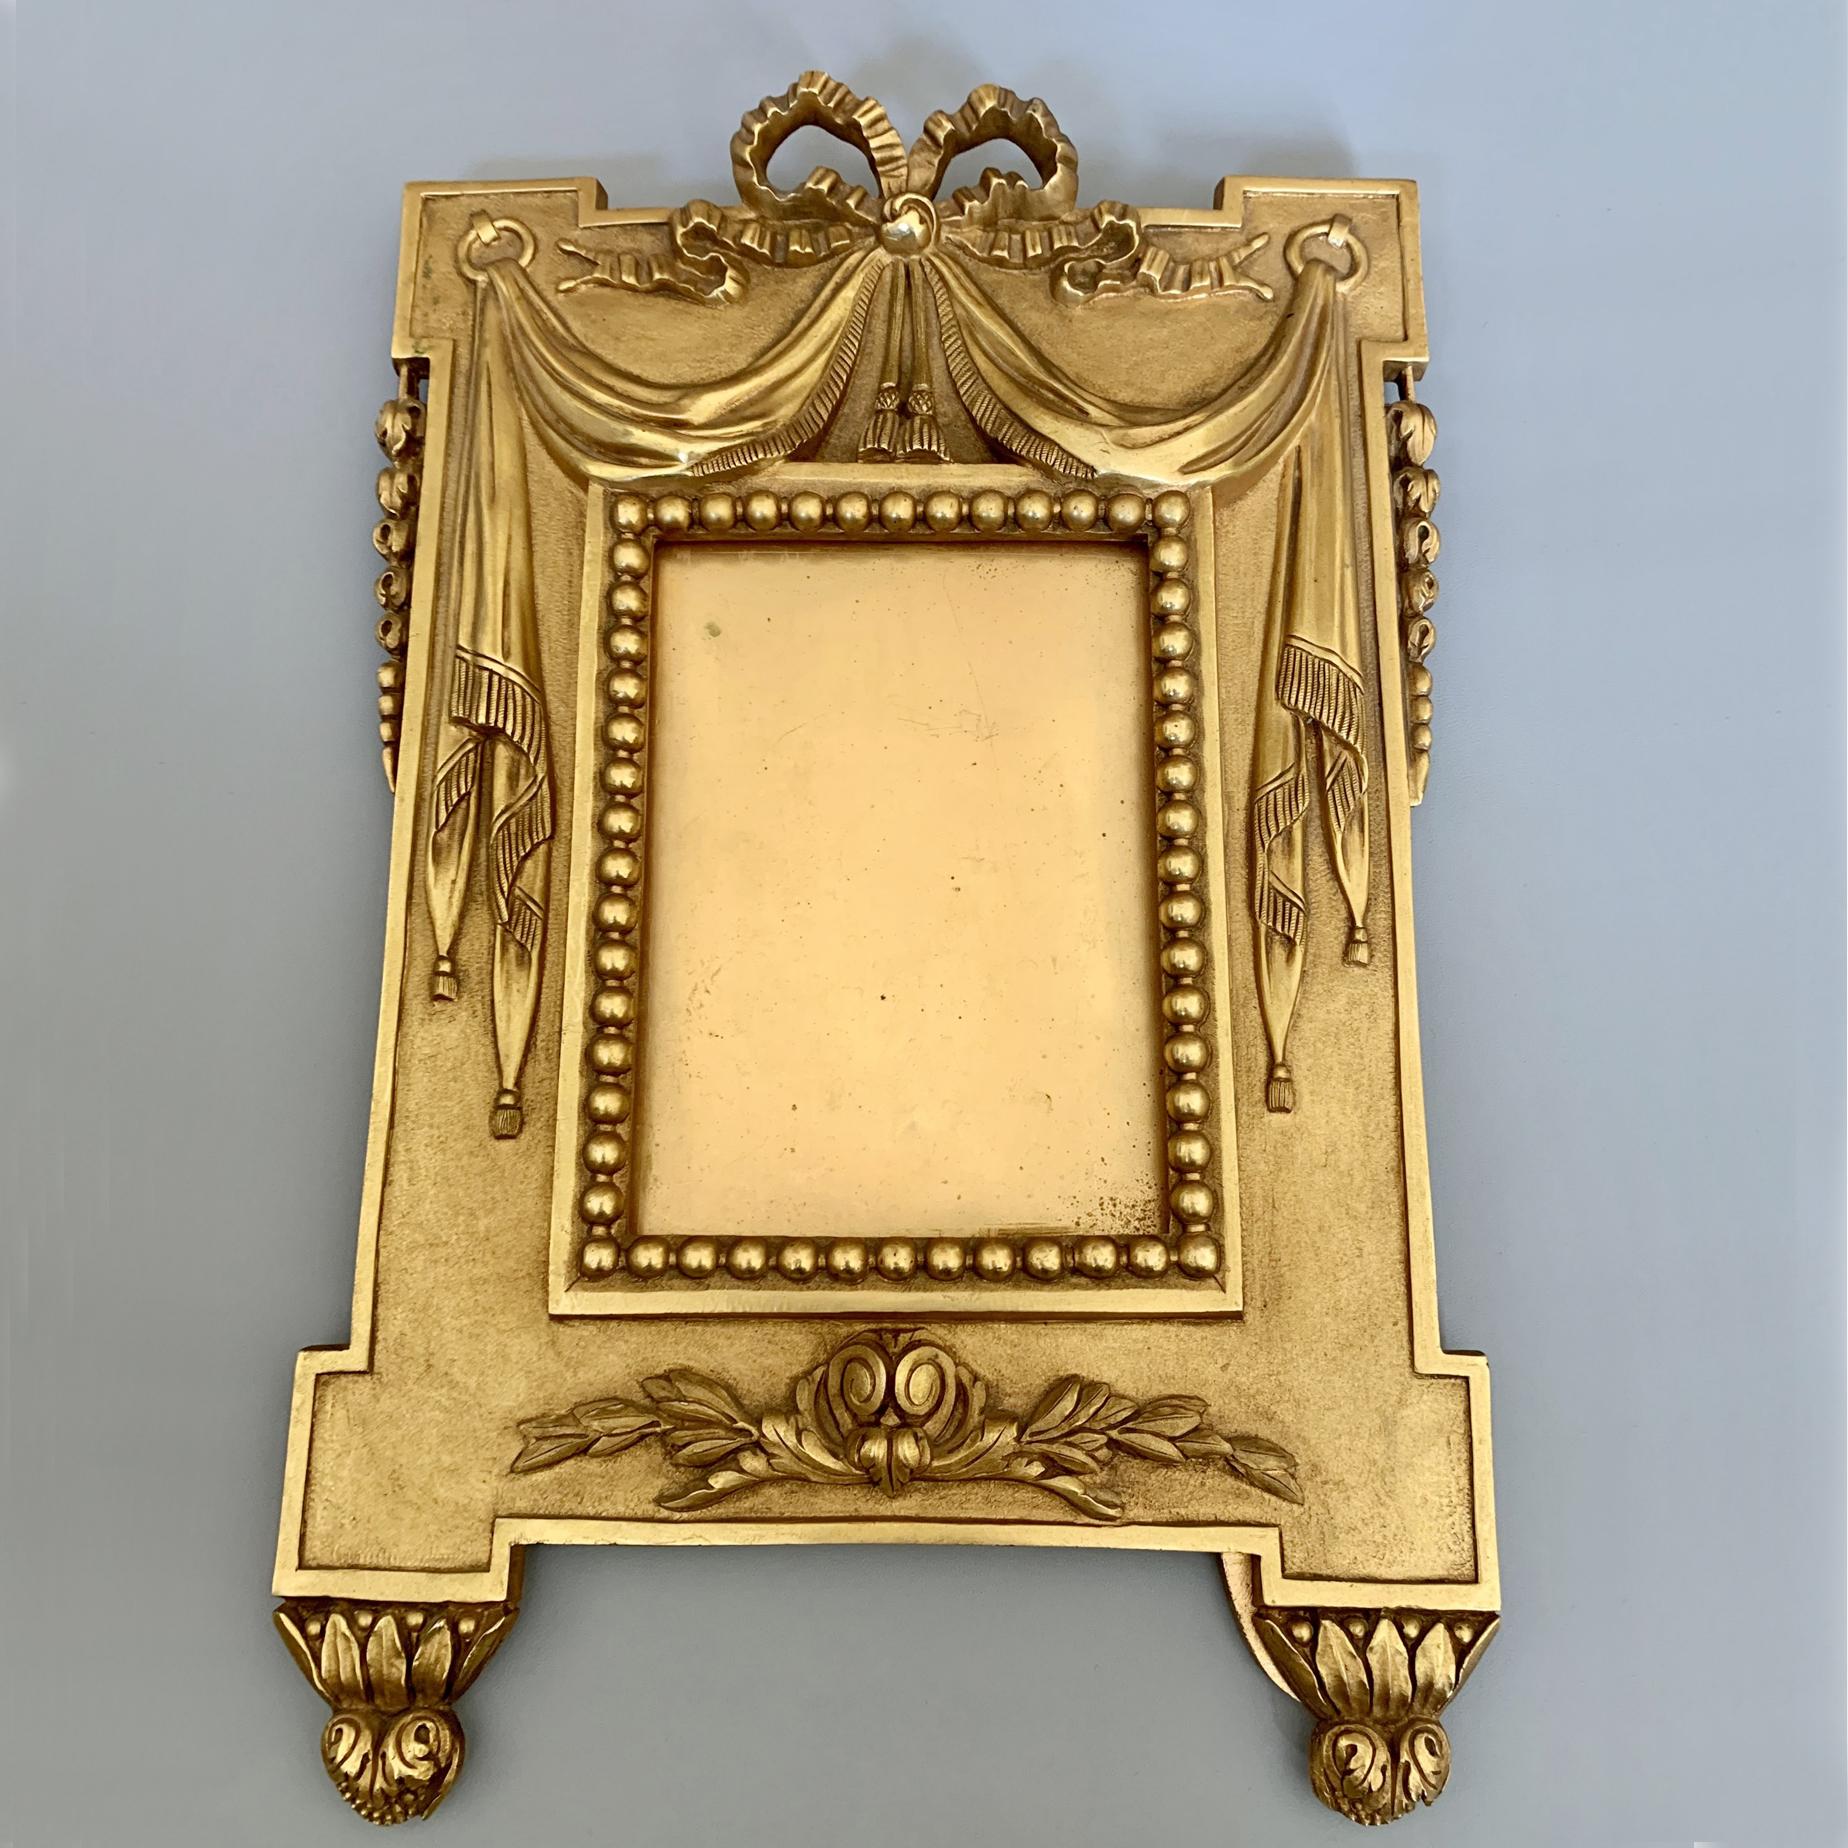 Pair of gilt bronze picture frames, Napoleon III period, French, circa 1875. The frames are decorated with draped curtains opening up to reveal and adorn the valuable picture. The ormolu frames were actually made for portraits as it became very